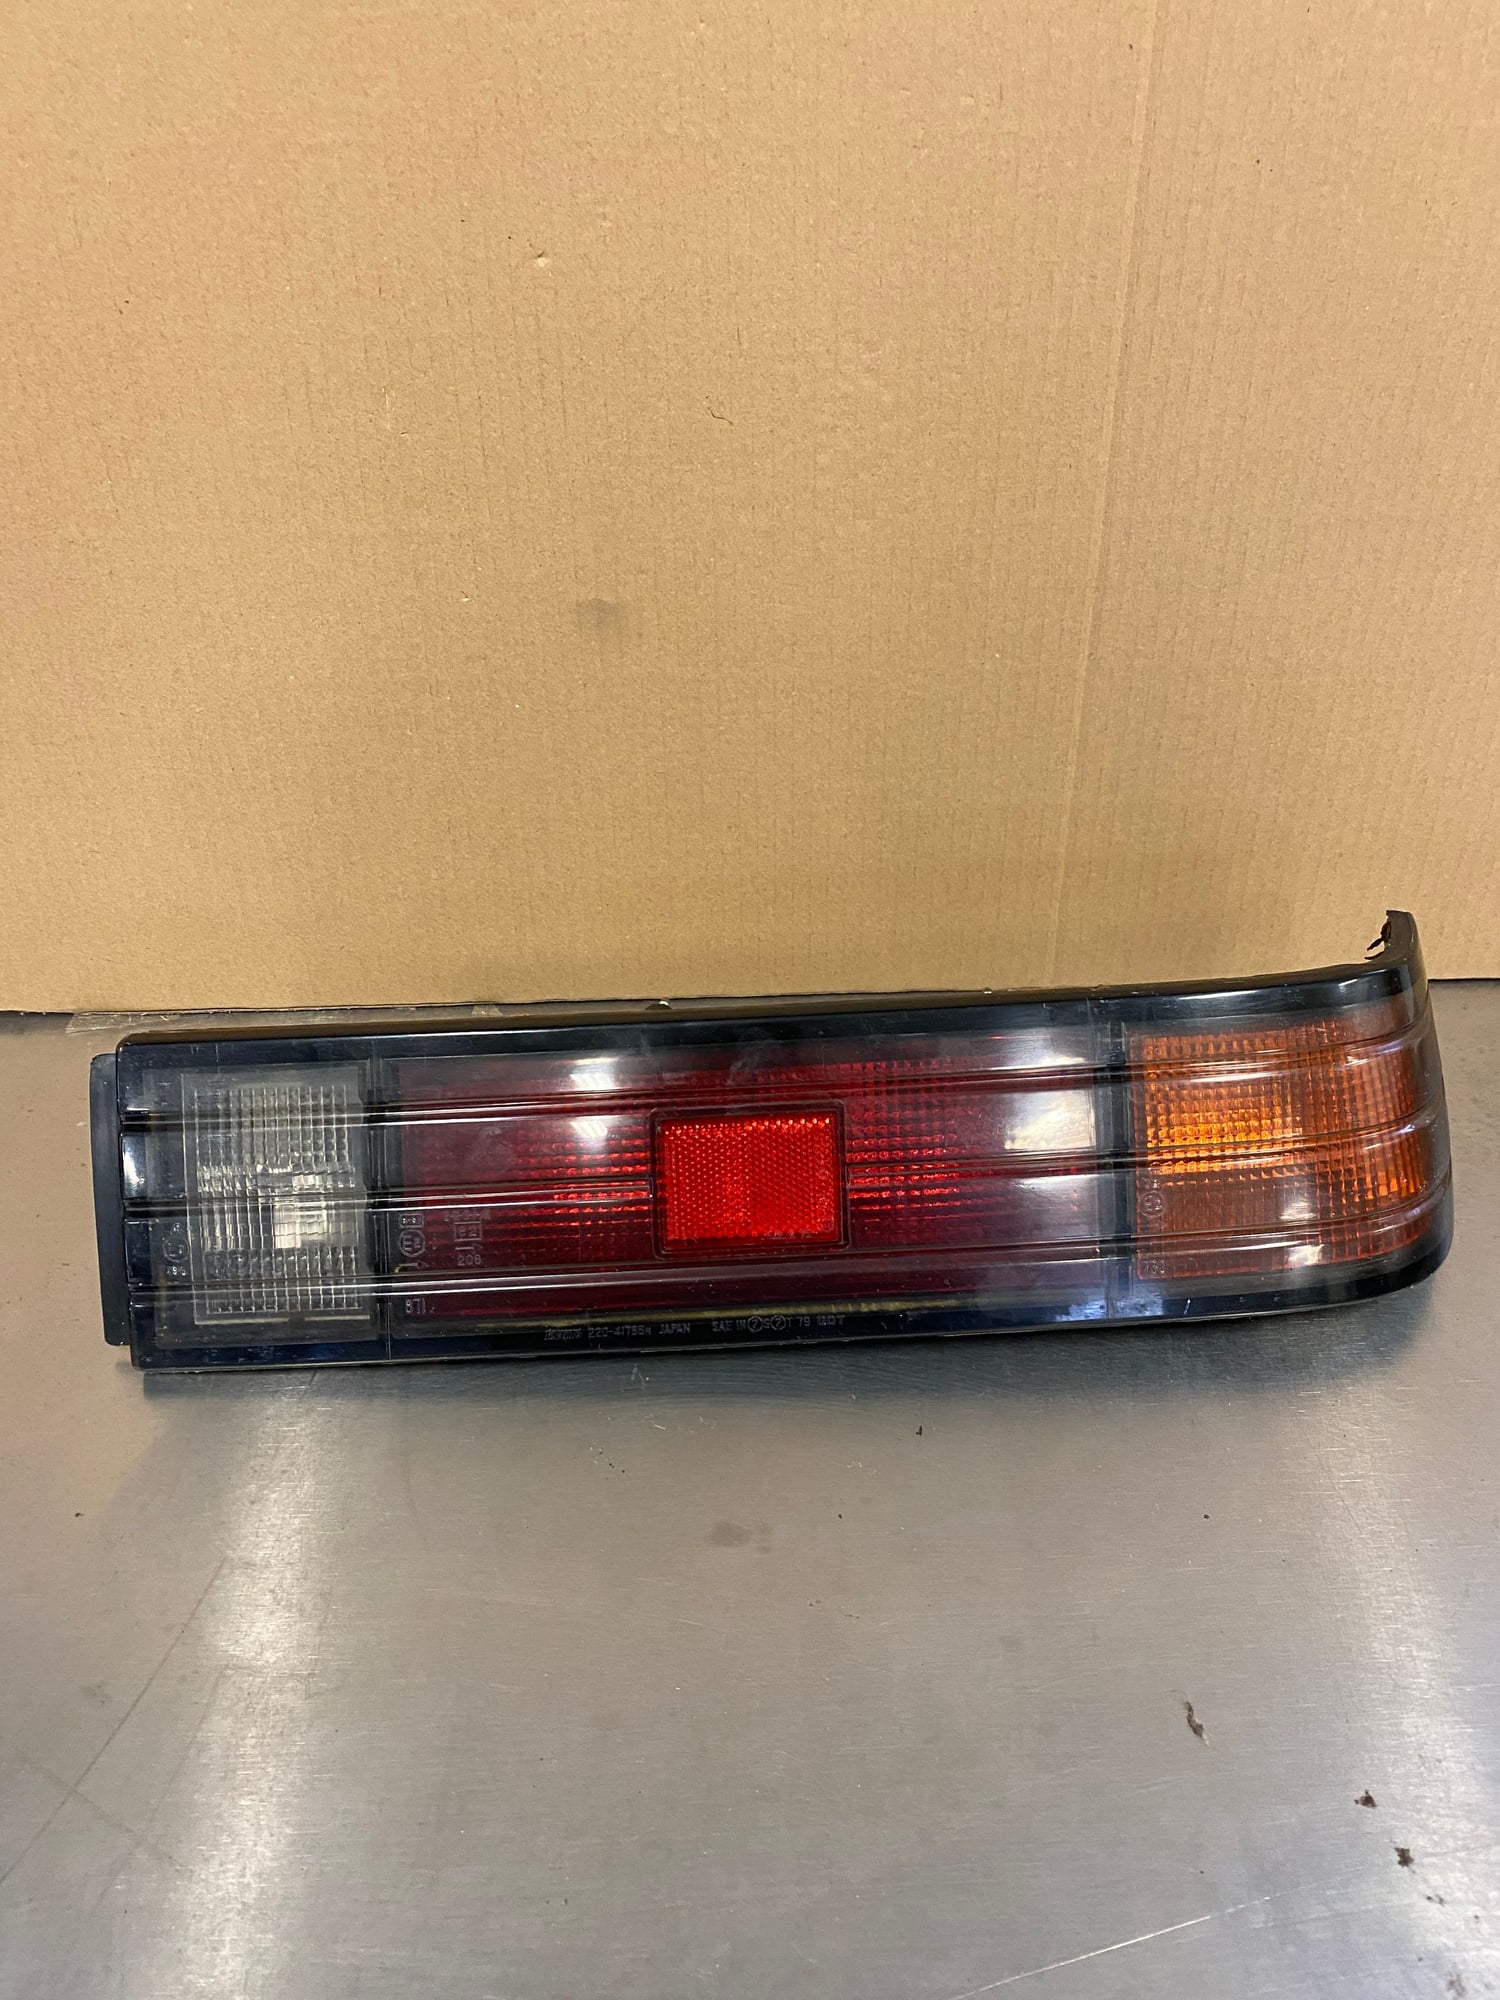 Lights - FB lights - Used - 1981 to 1985 Mazda RX-7 - Akron, OH 44321, United States